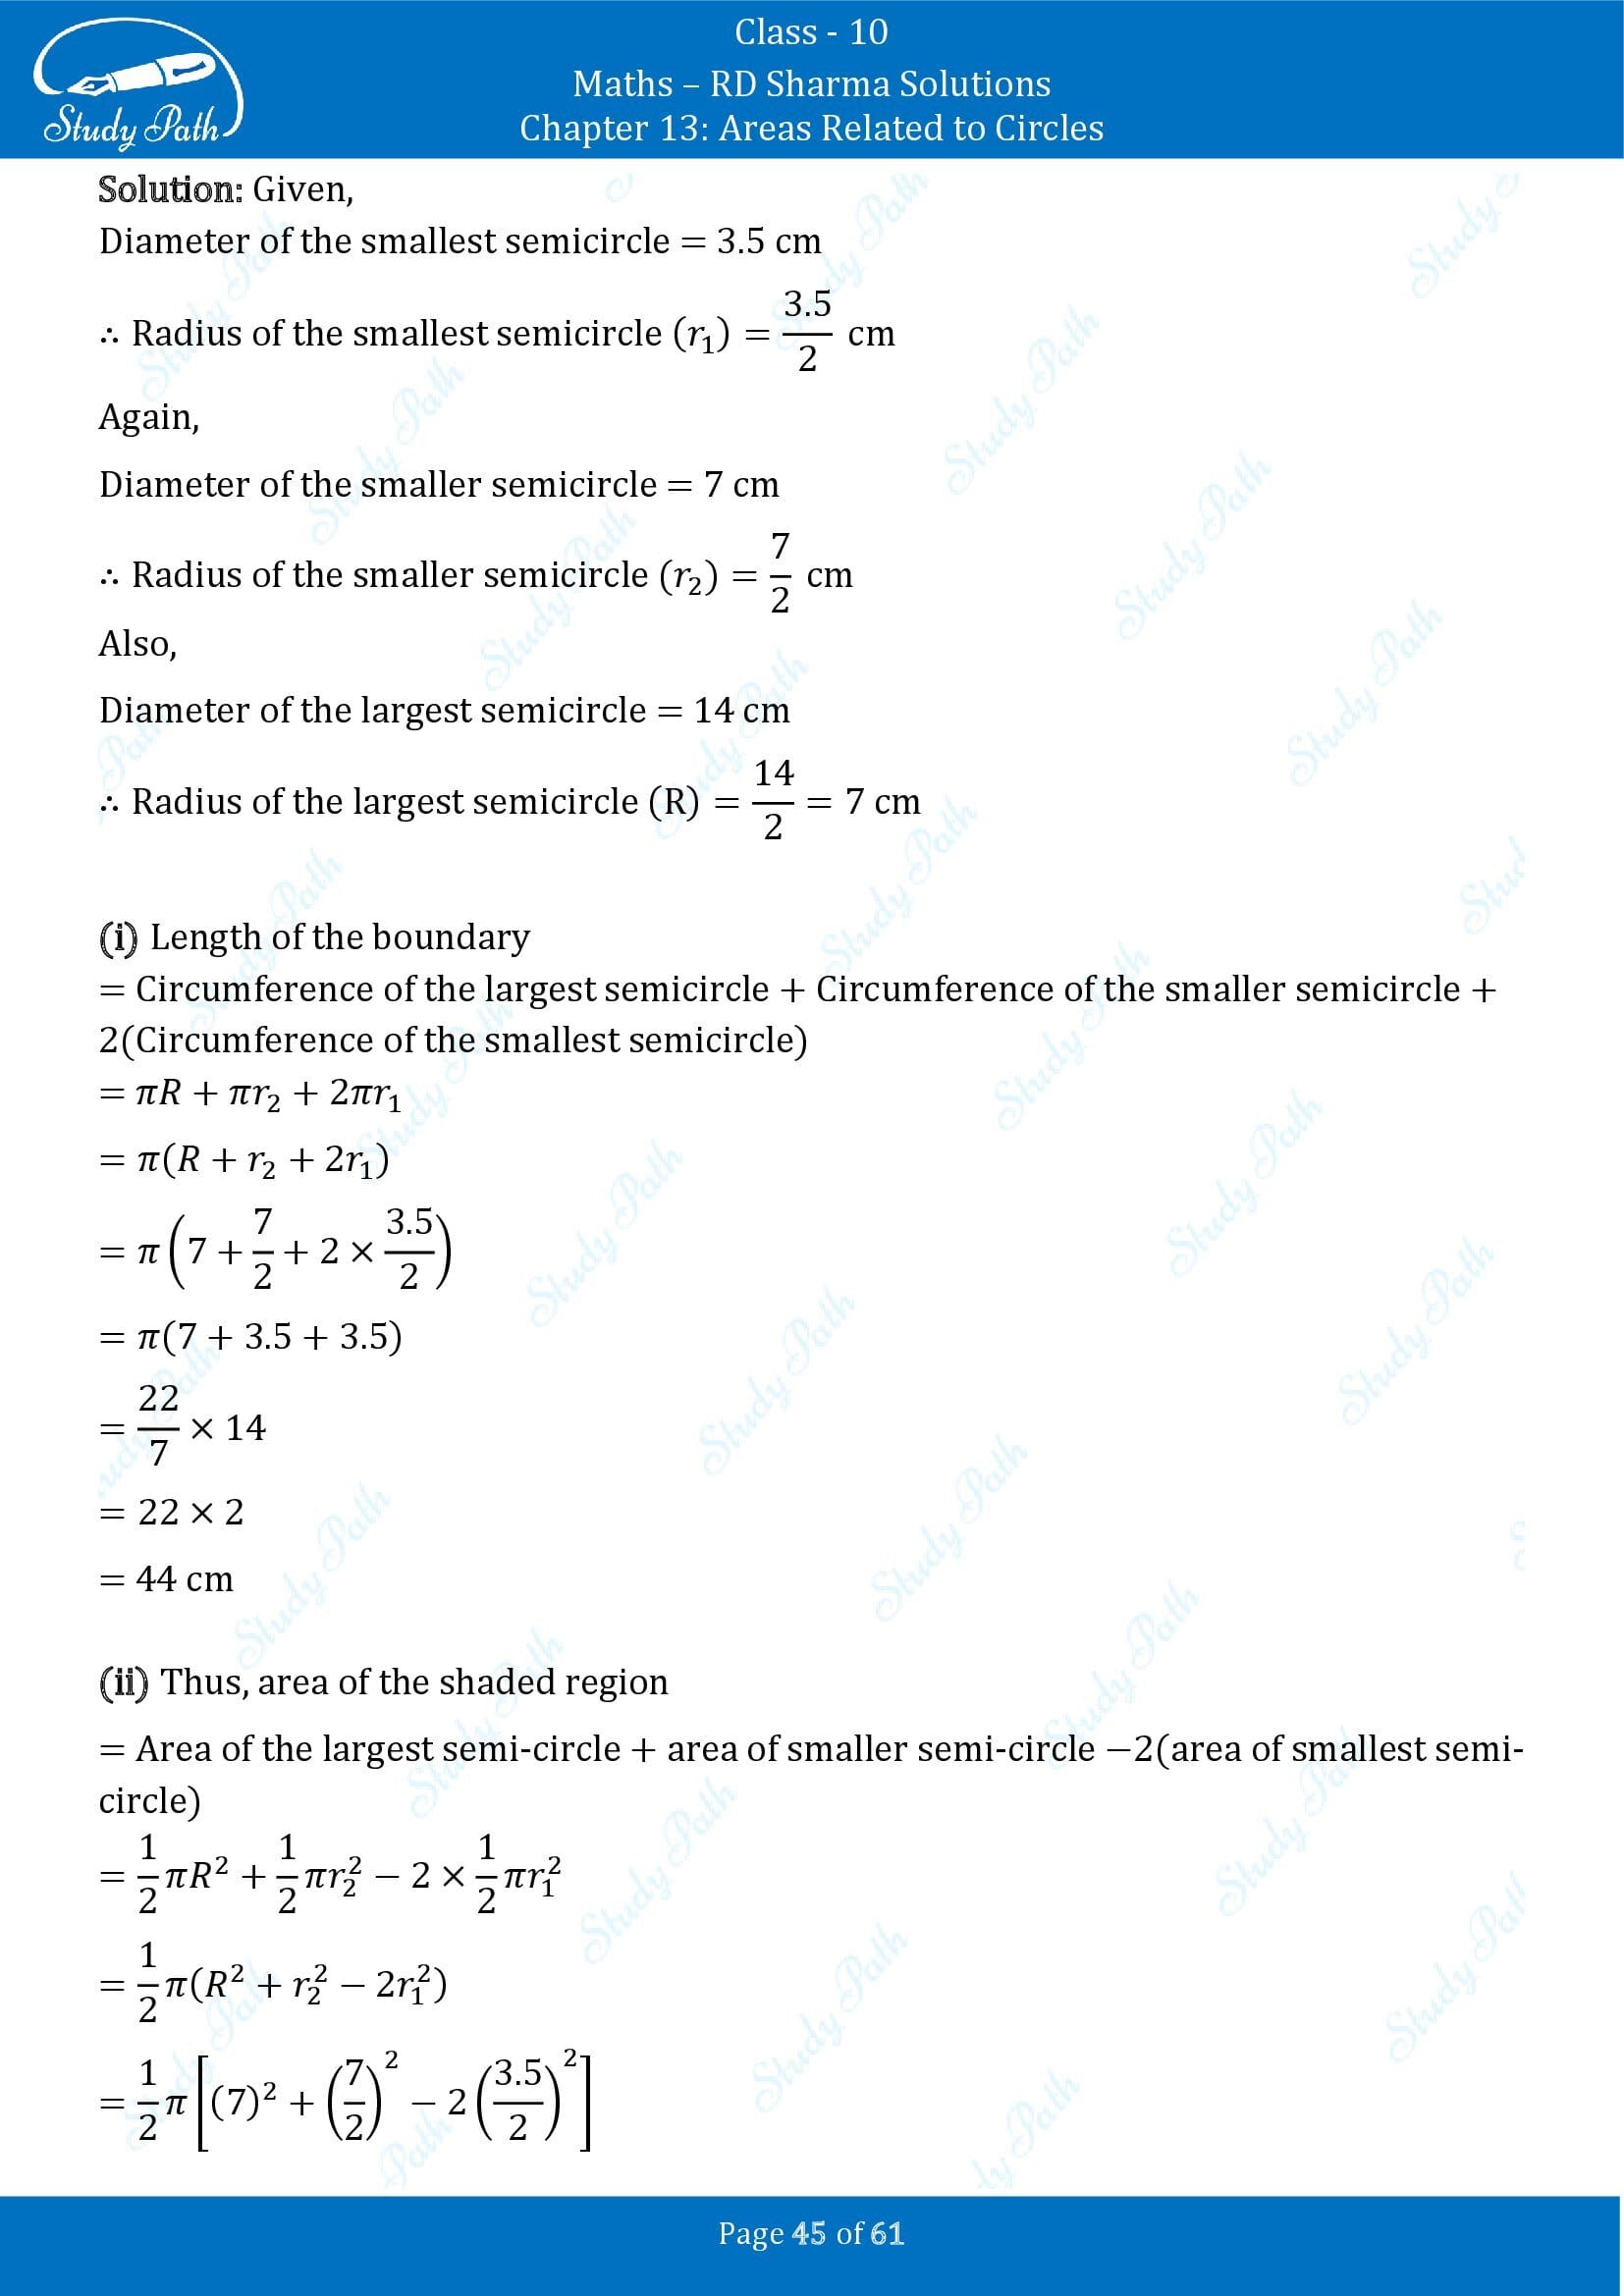 RD Sharma Solutions Class 10 Chapter 13 Areas Related to Circles Exercise 13.4 00045